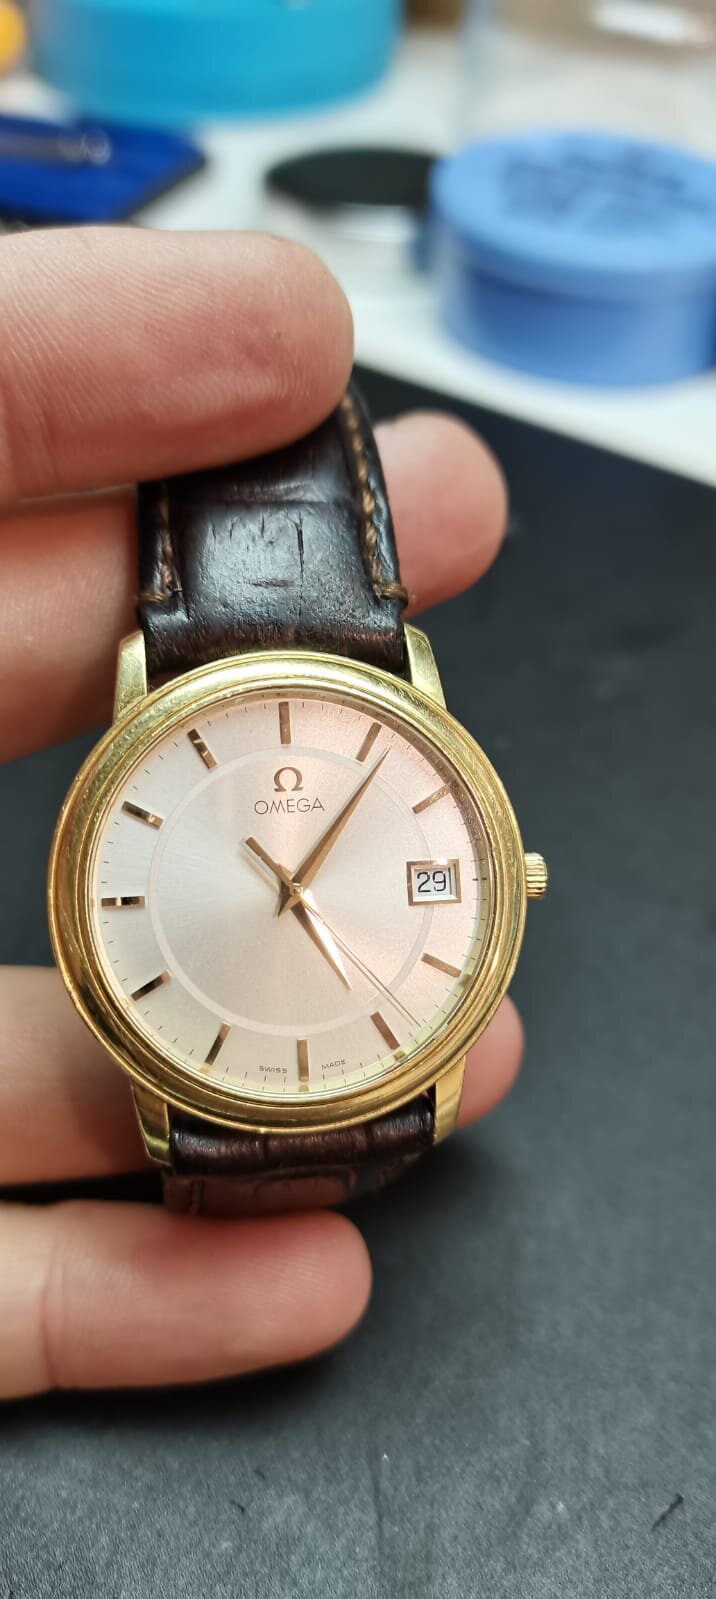 Omega Deville 18ct gold 59850250 battery and reseal.jpeg